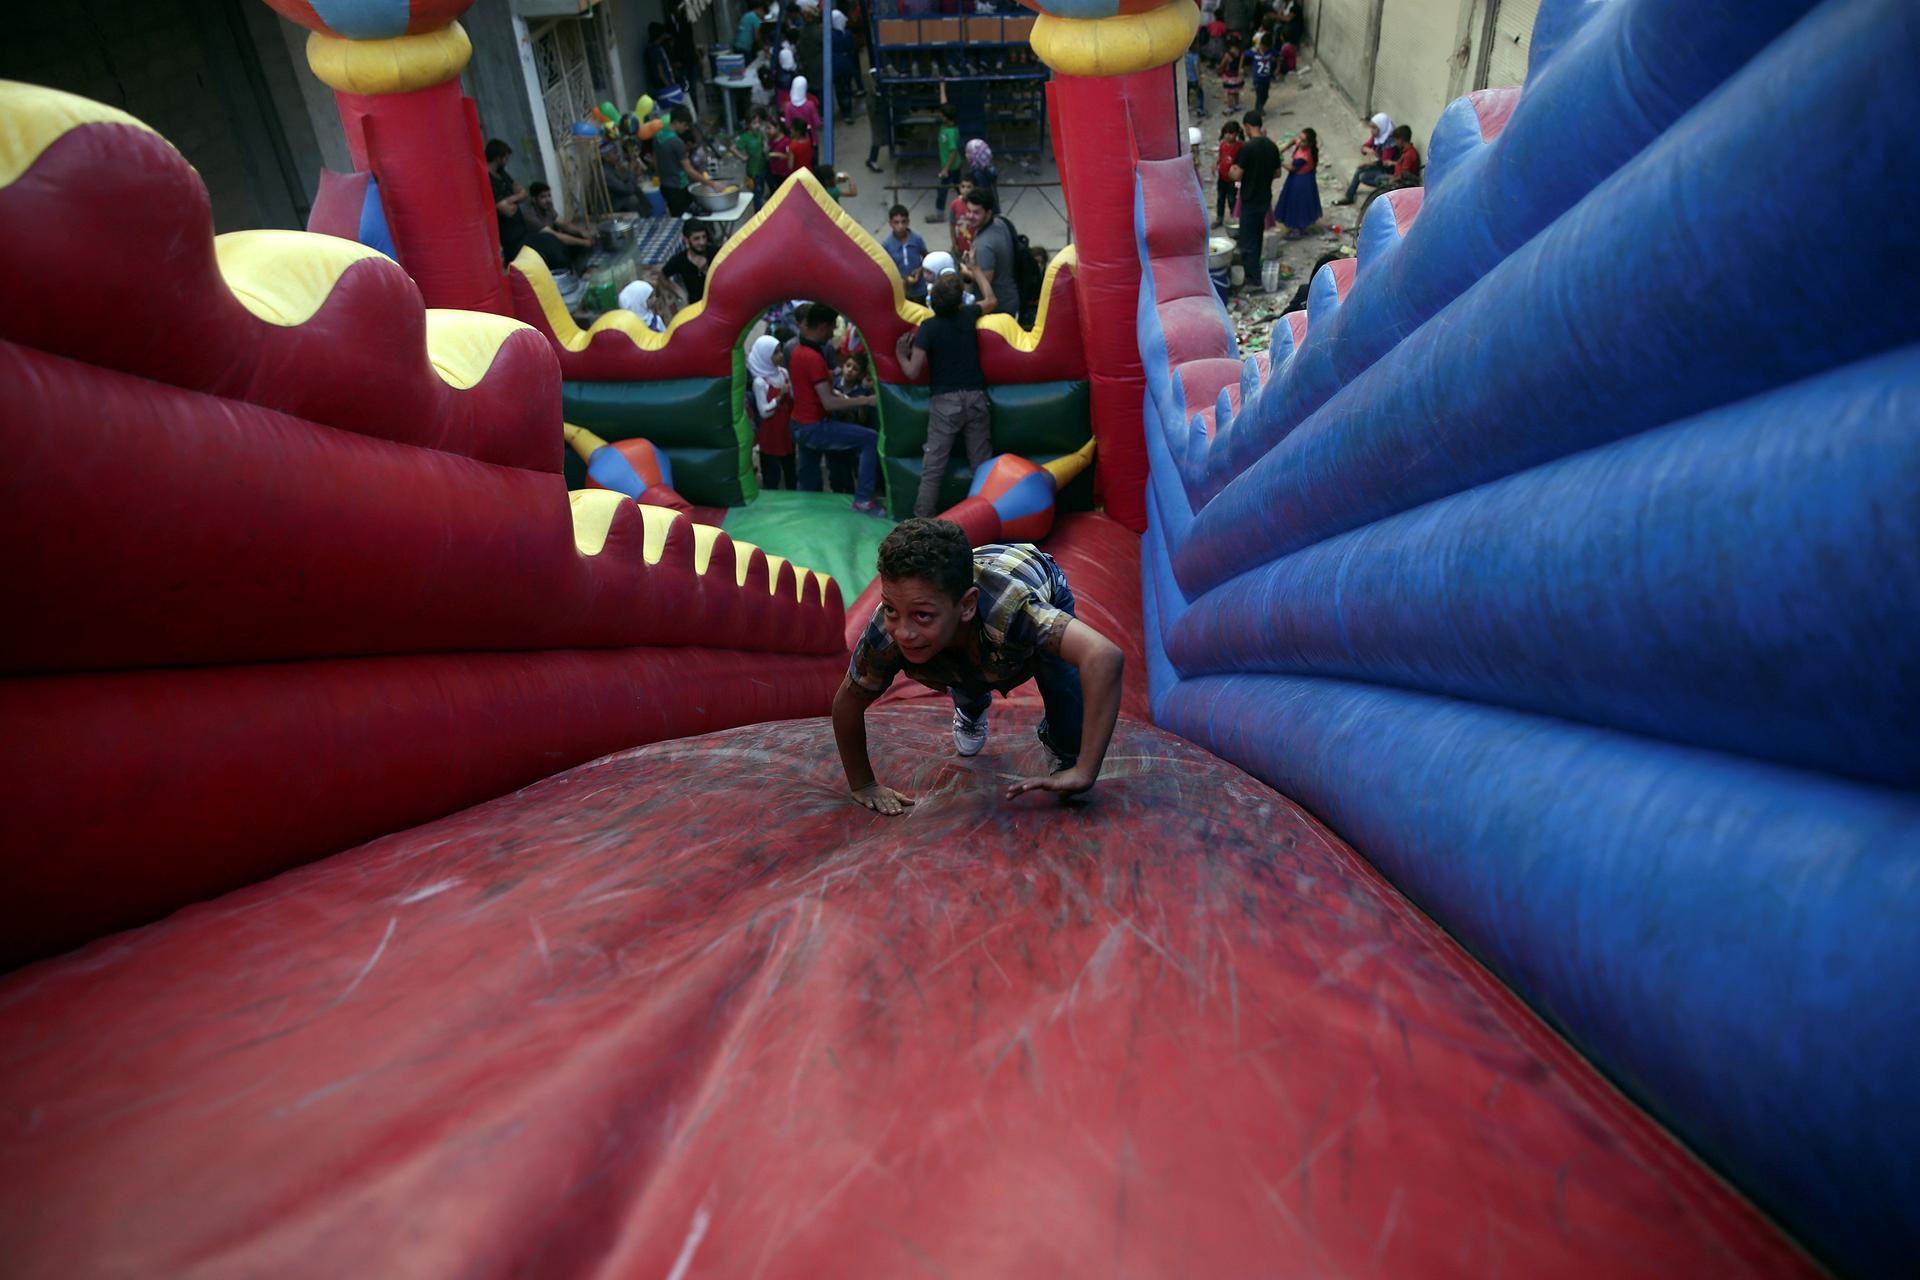 Children played on the bouncy castle on the last day of the Muslim holiday of Eid al-Adha in the rebel held besieged town of Hamouriyeh, outside of the Syrian capital of Damascus on Thursday, September 15, 2016.